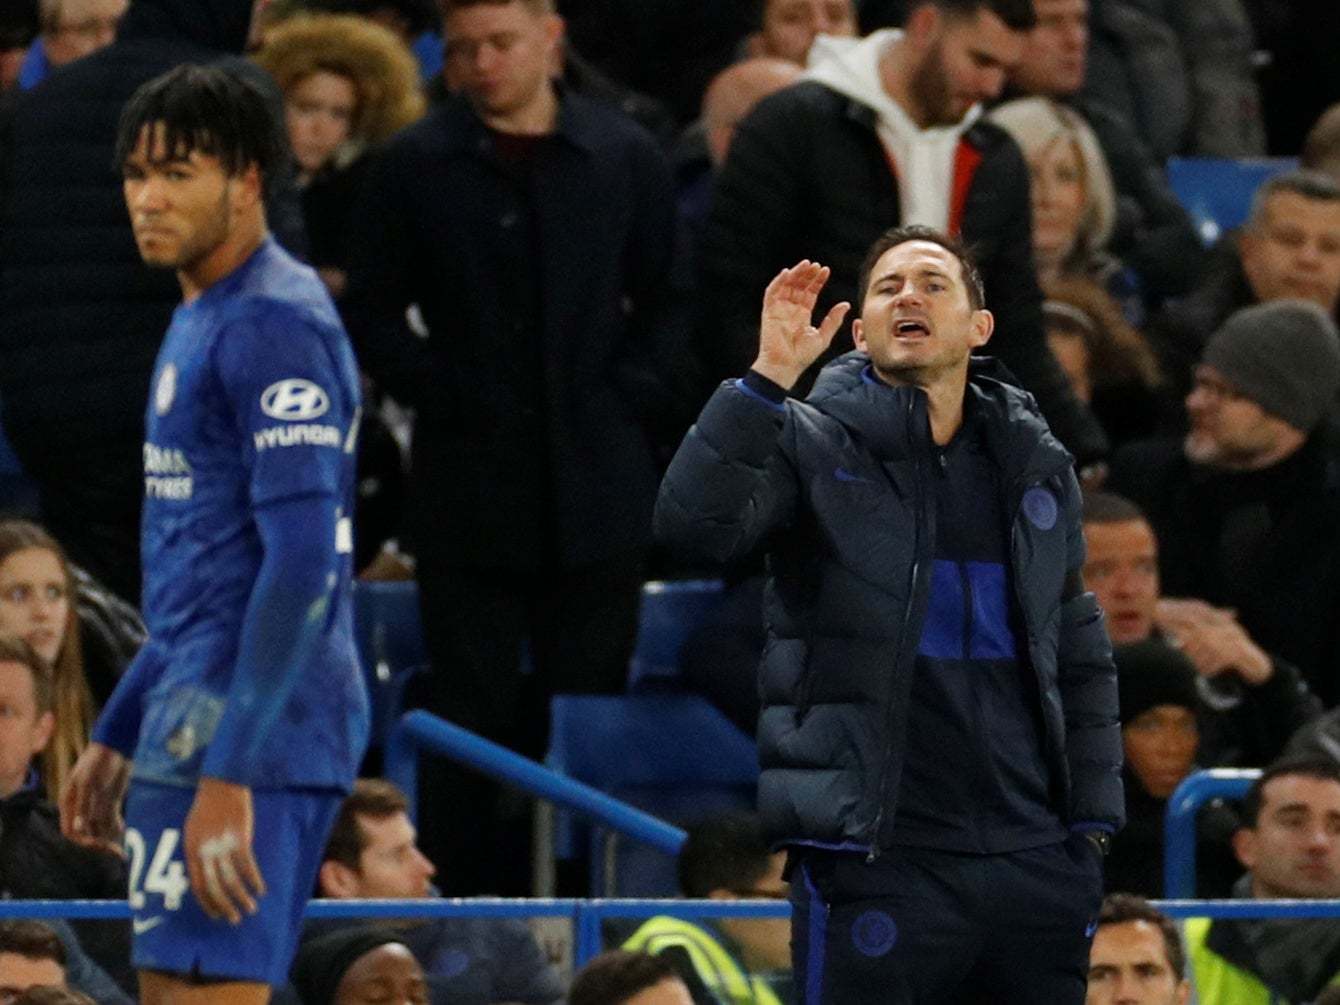 Frank Lampard endured a frustrating afternoon on the touchline